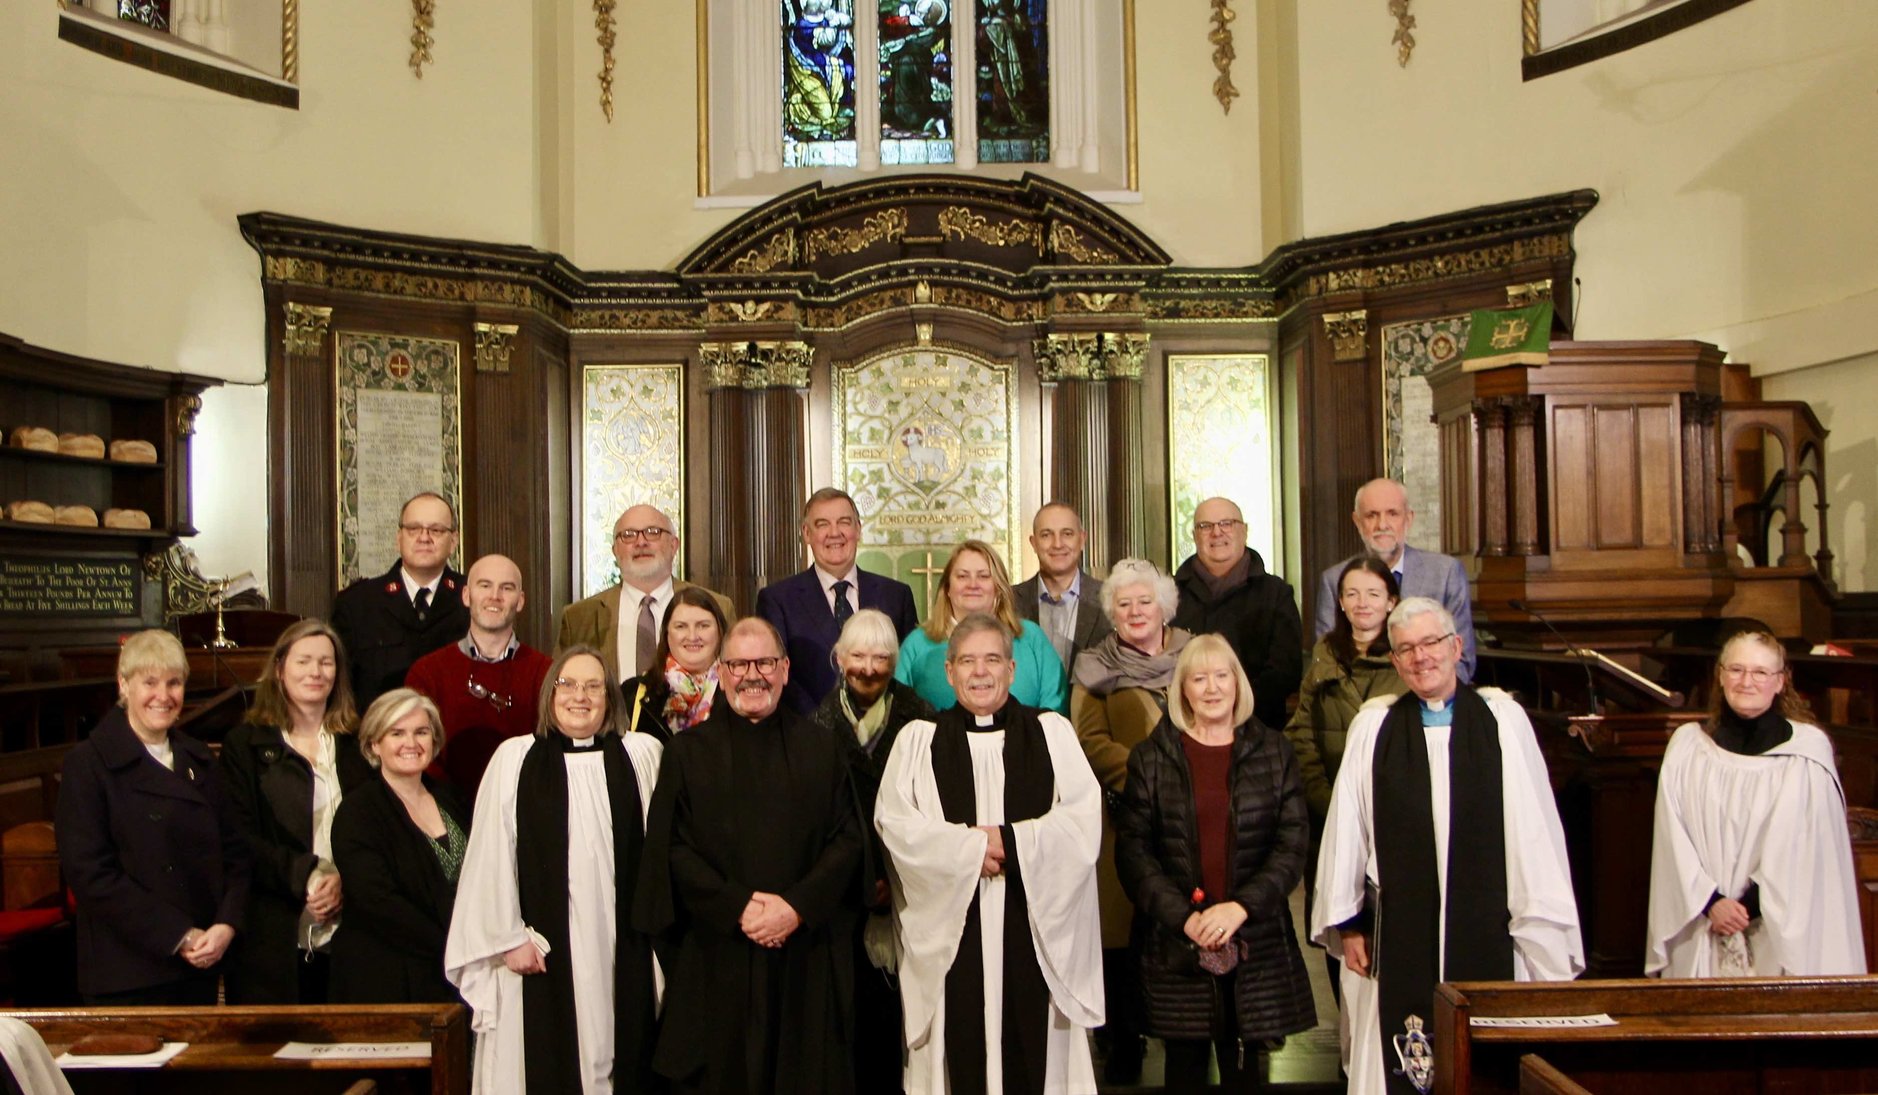 Representatives of the charities who benefited from the 2021 Black Santa Sit Out with clergy and staff of St Ann's and the Dean of Belfast. Masks were worn and removed for the photo.